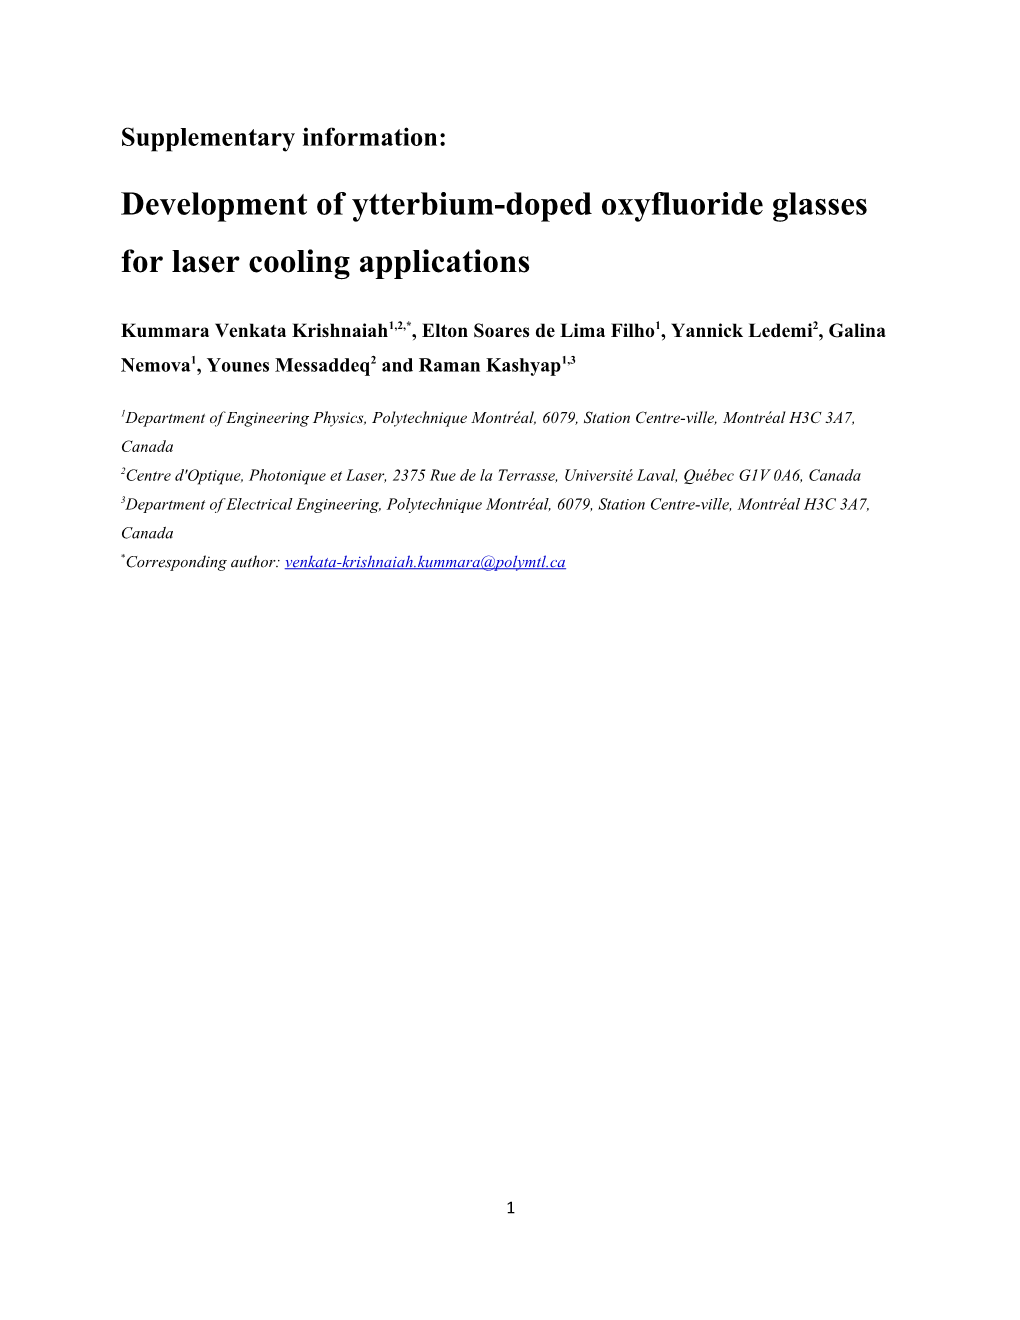 Development of Ytterbium-Doped Oxyfluoride Glasses for Laser Cooling Applications